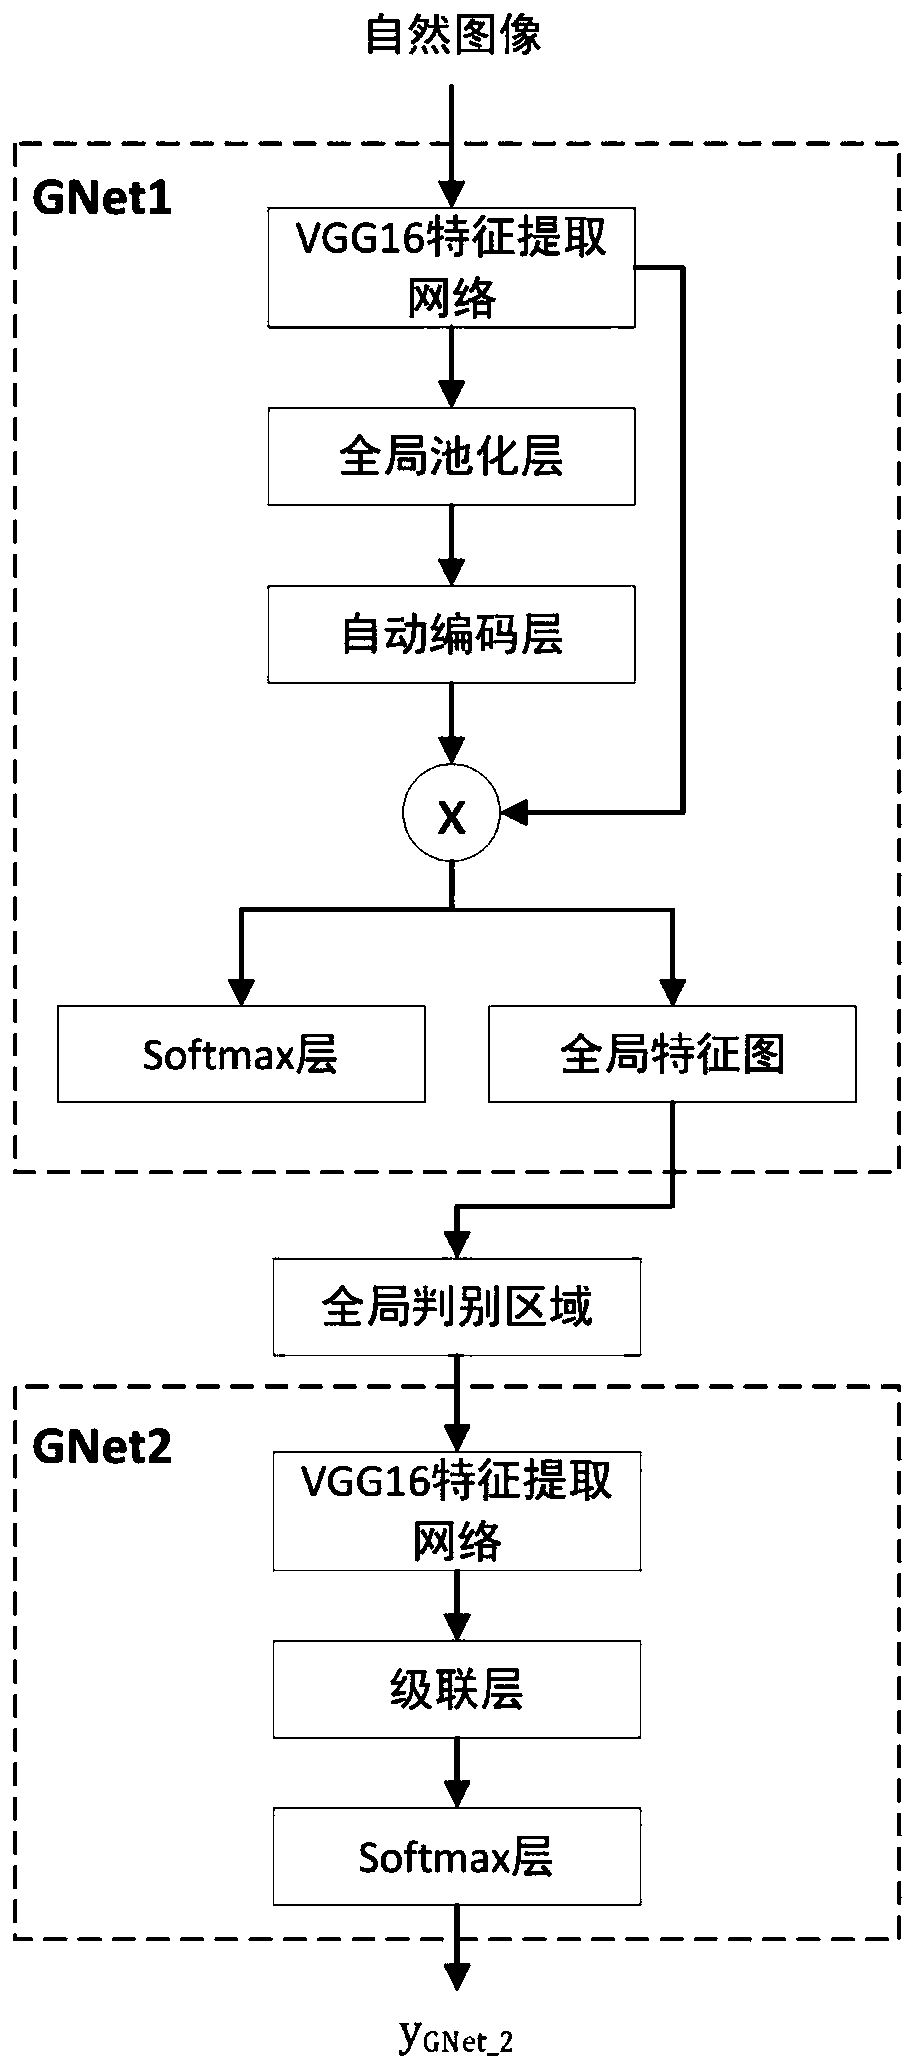 Fine-grained image classification method based on attention transfer mechanism